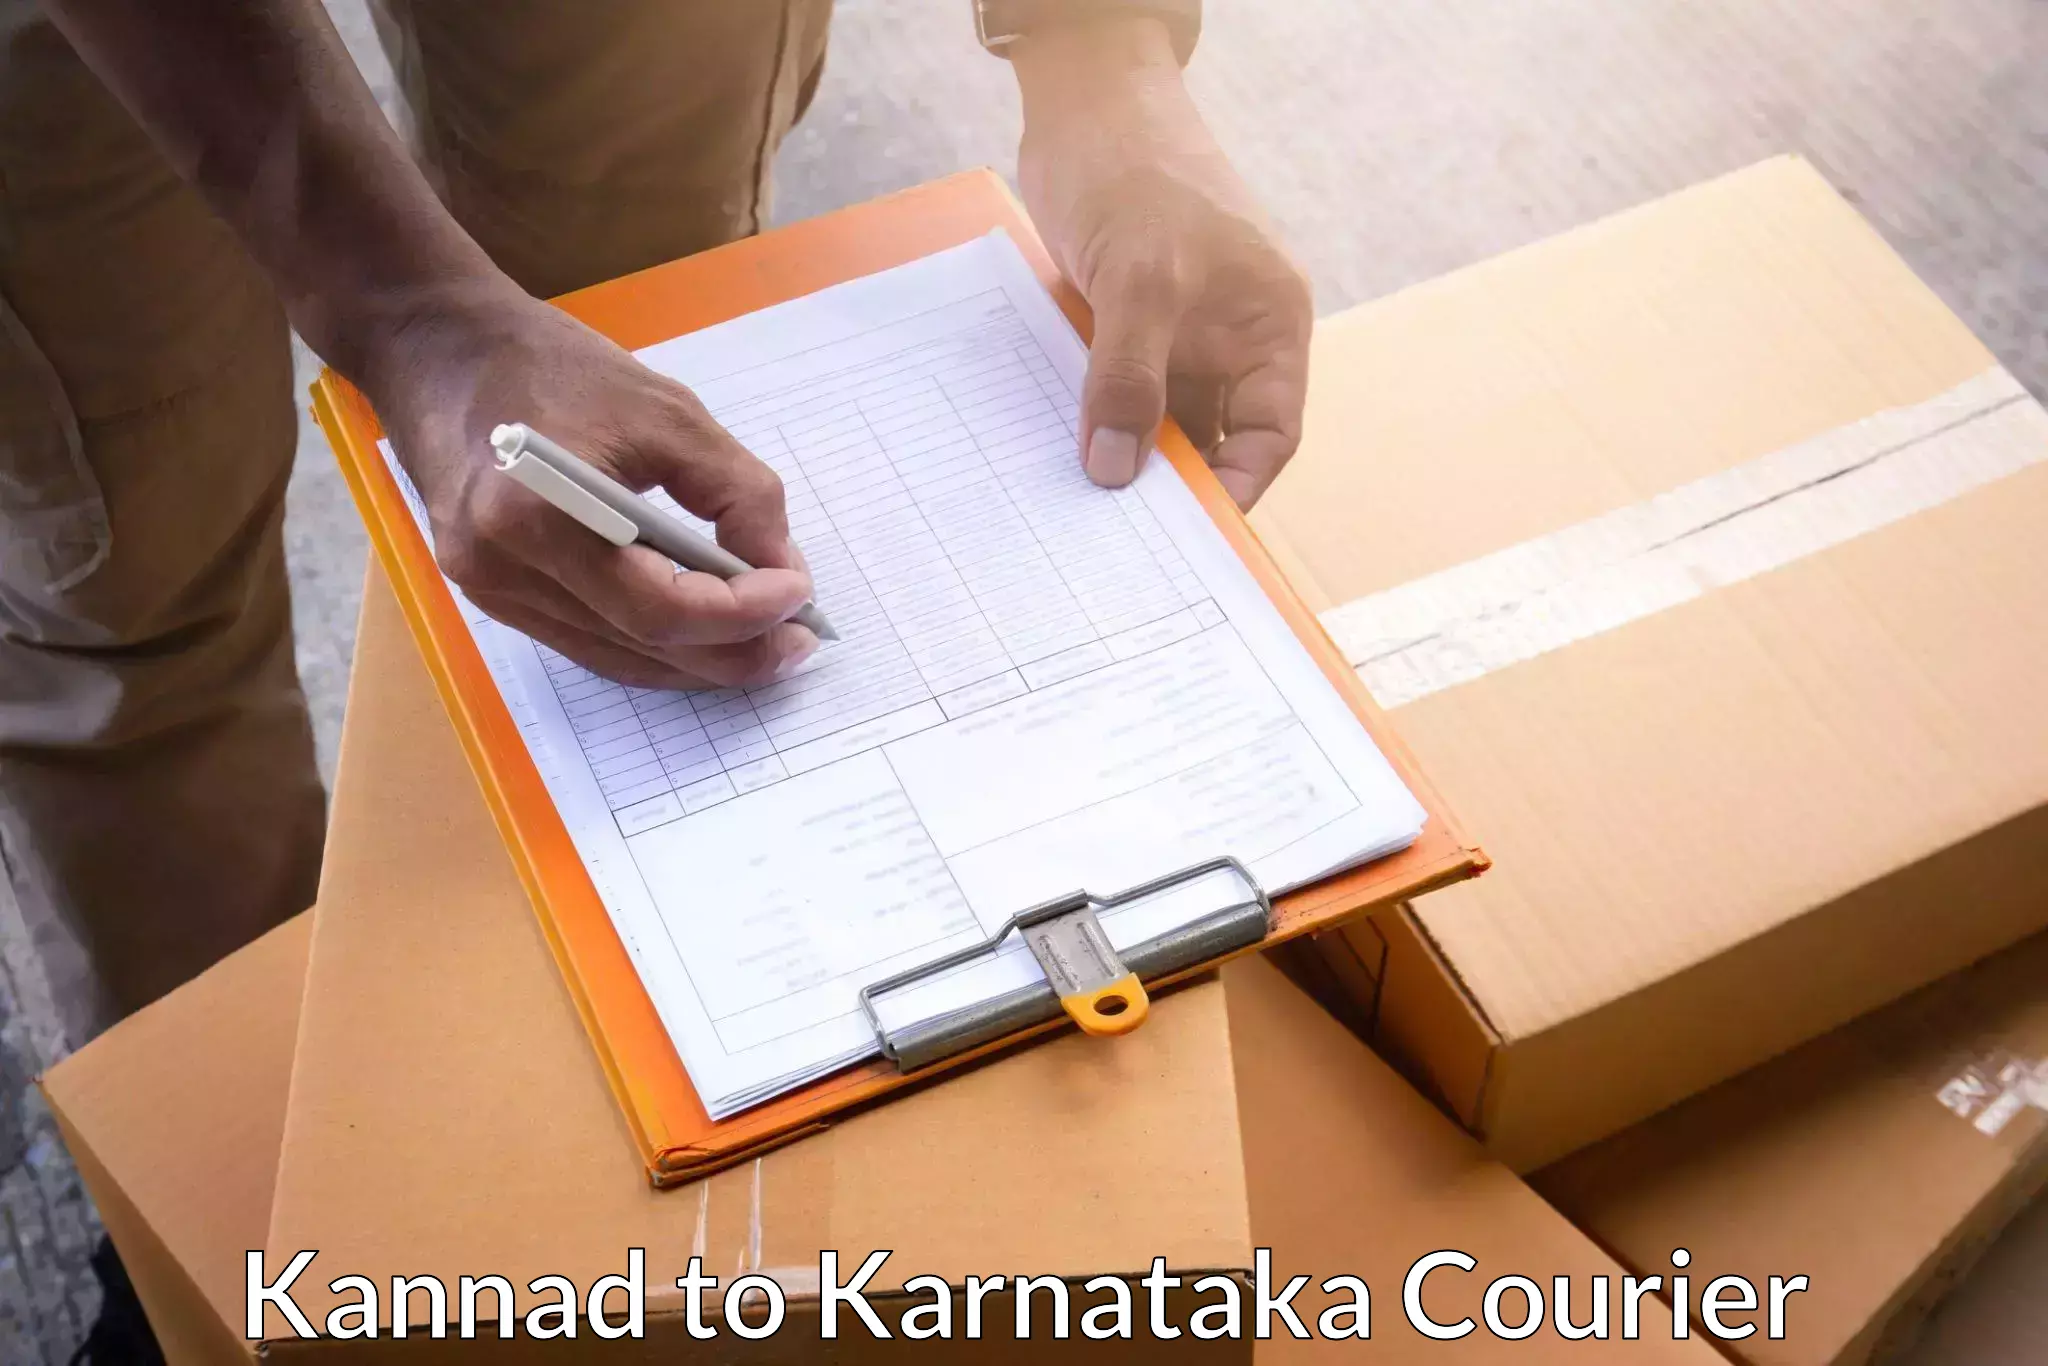 Personalized courier experiences Kannad to Bengaluru